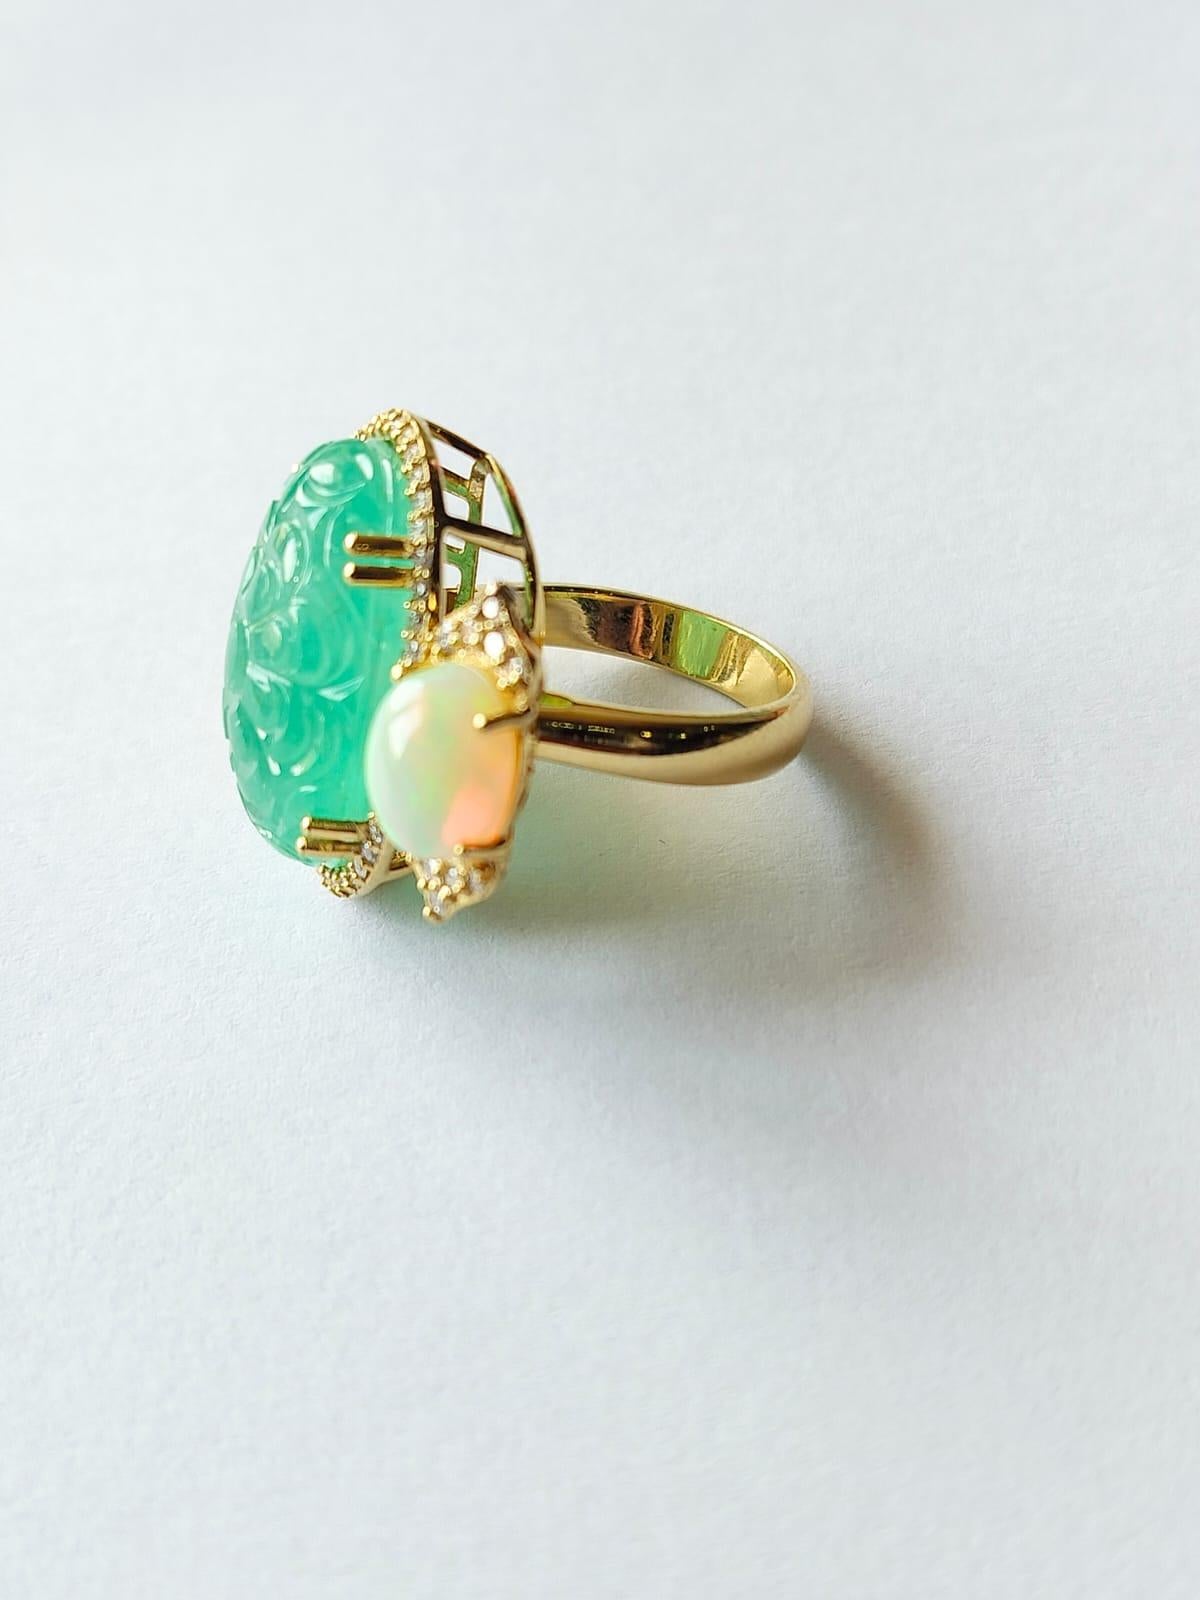 A very gorgeous and beautiful, Art Deco style Emerald and Opal Ring set in 18K Gold & Diamonds. The weight of the Emerald is 18.22 carats. The carved Emerald is of Russian origin and is completely natural, without any treatment. The weight of Opal